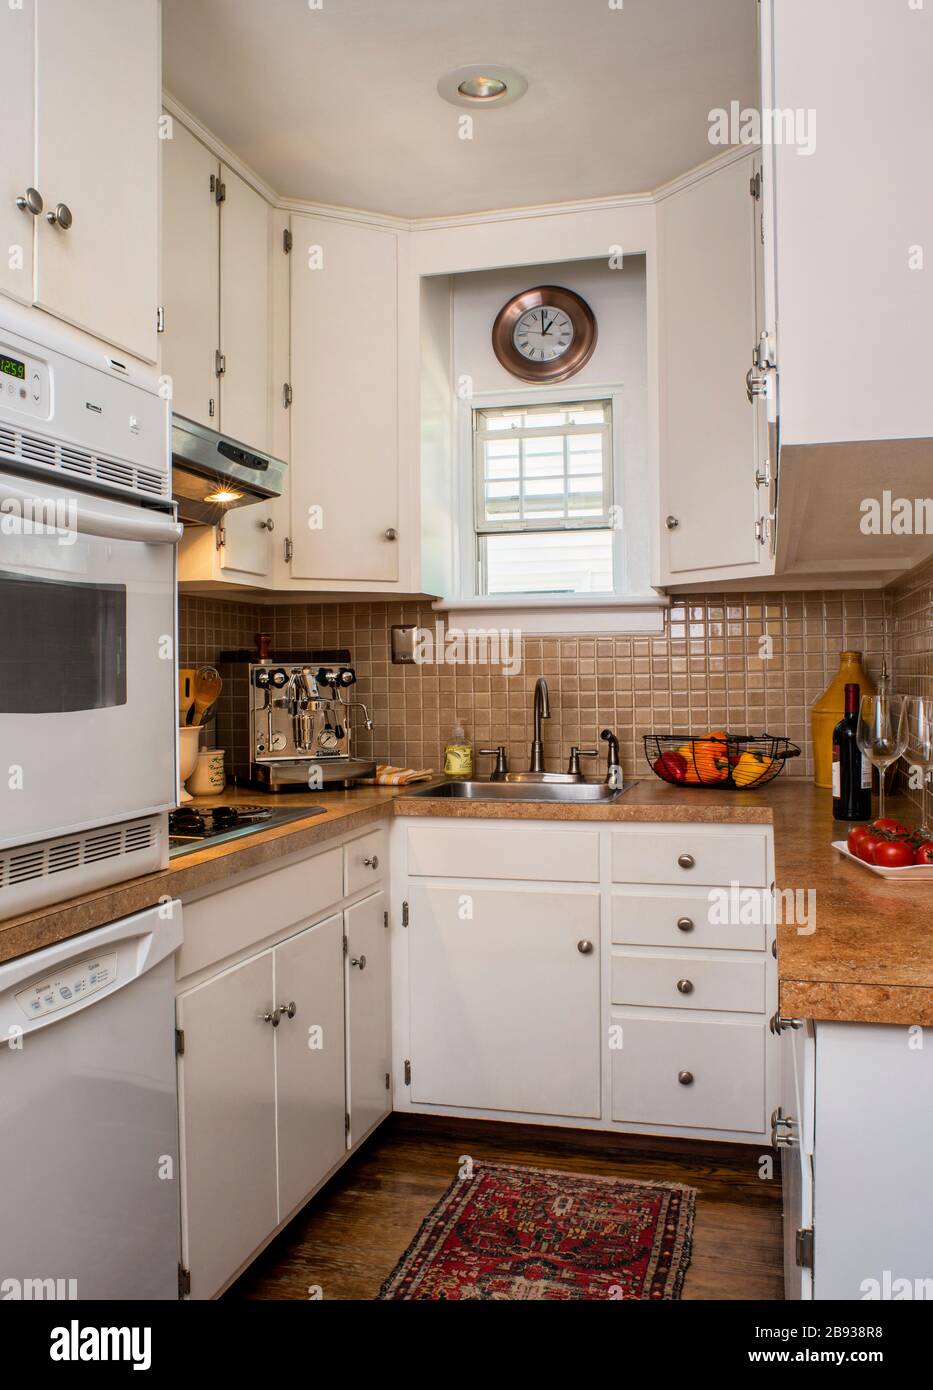 Small House Decorating-Small kitchen Stock Photo